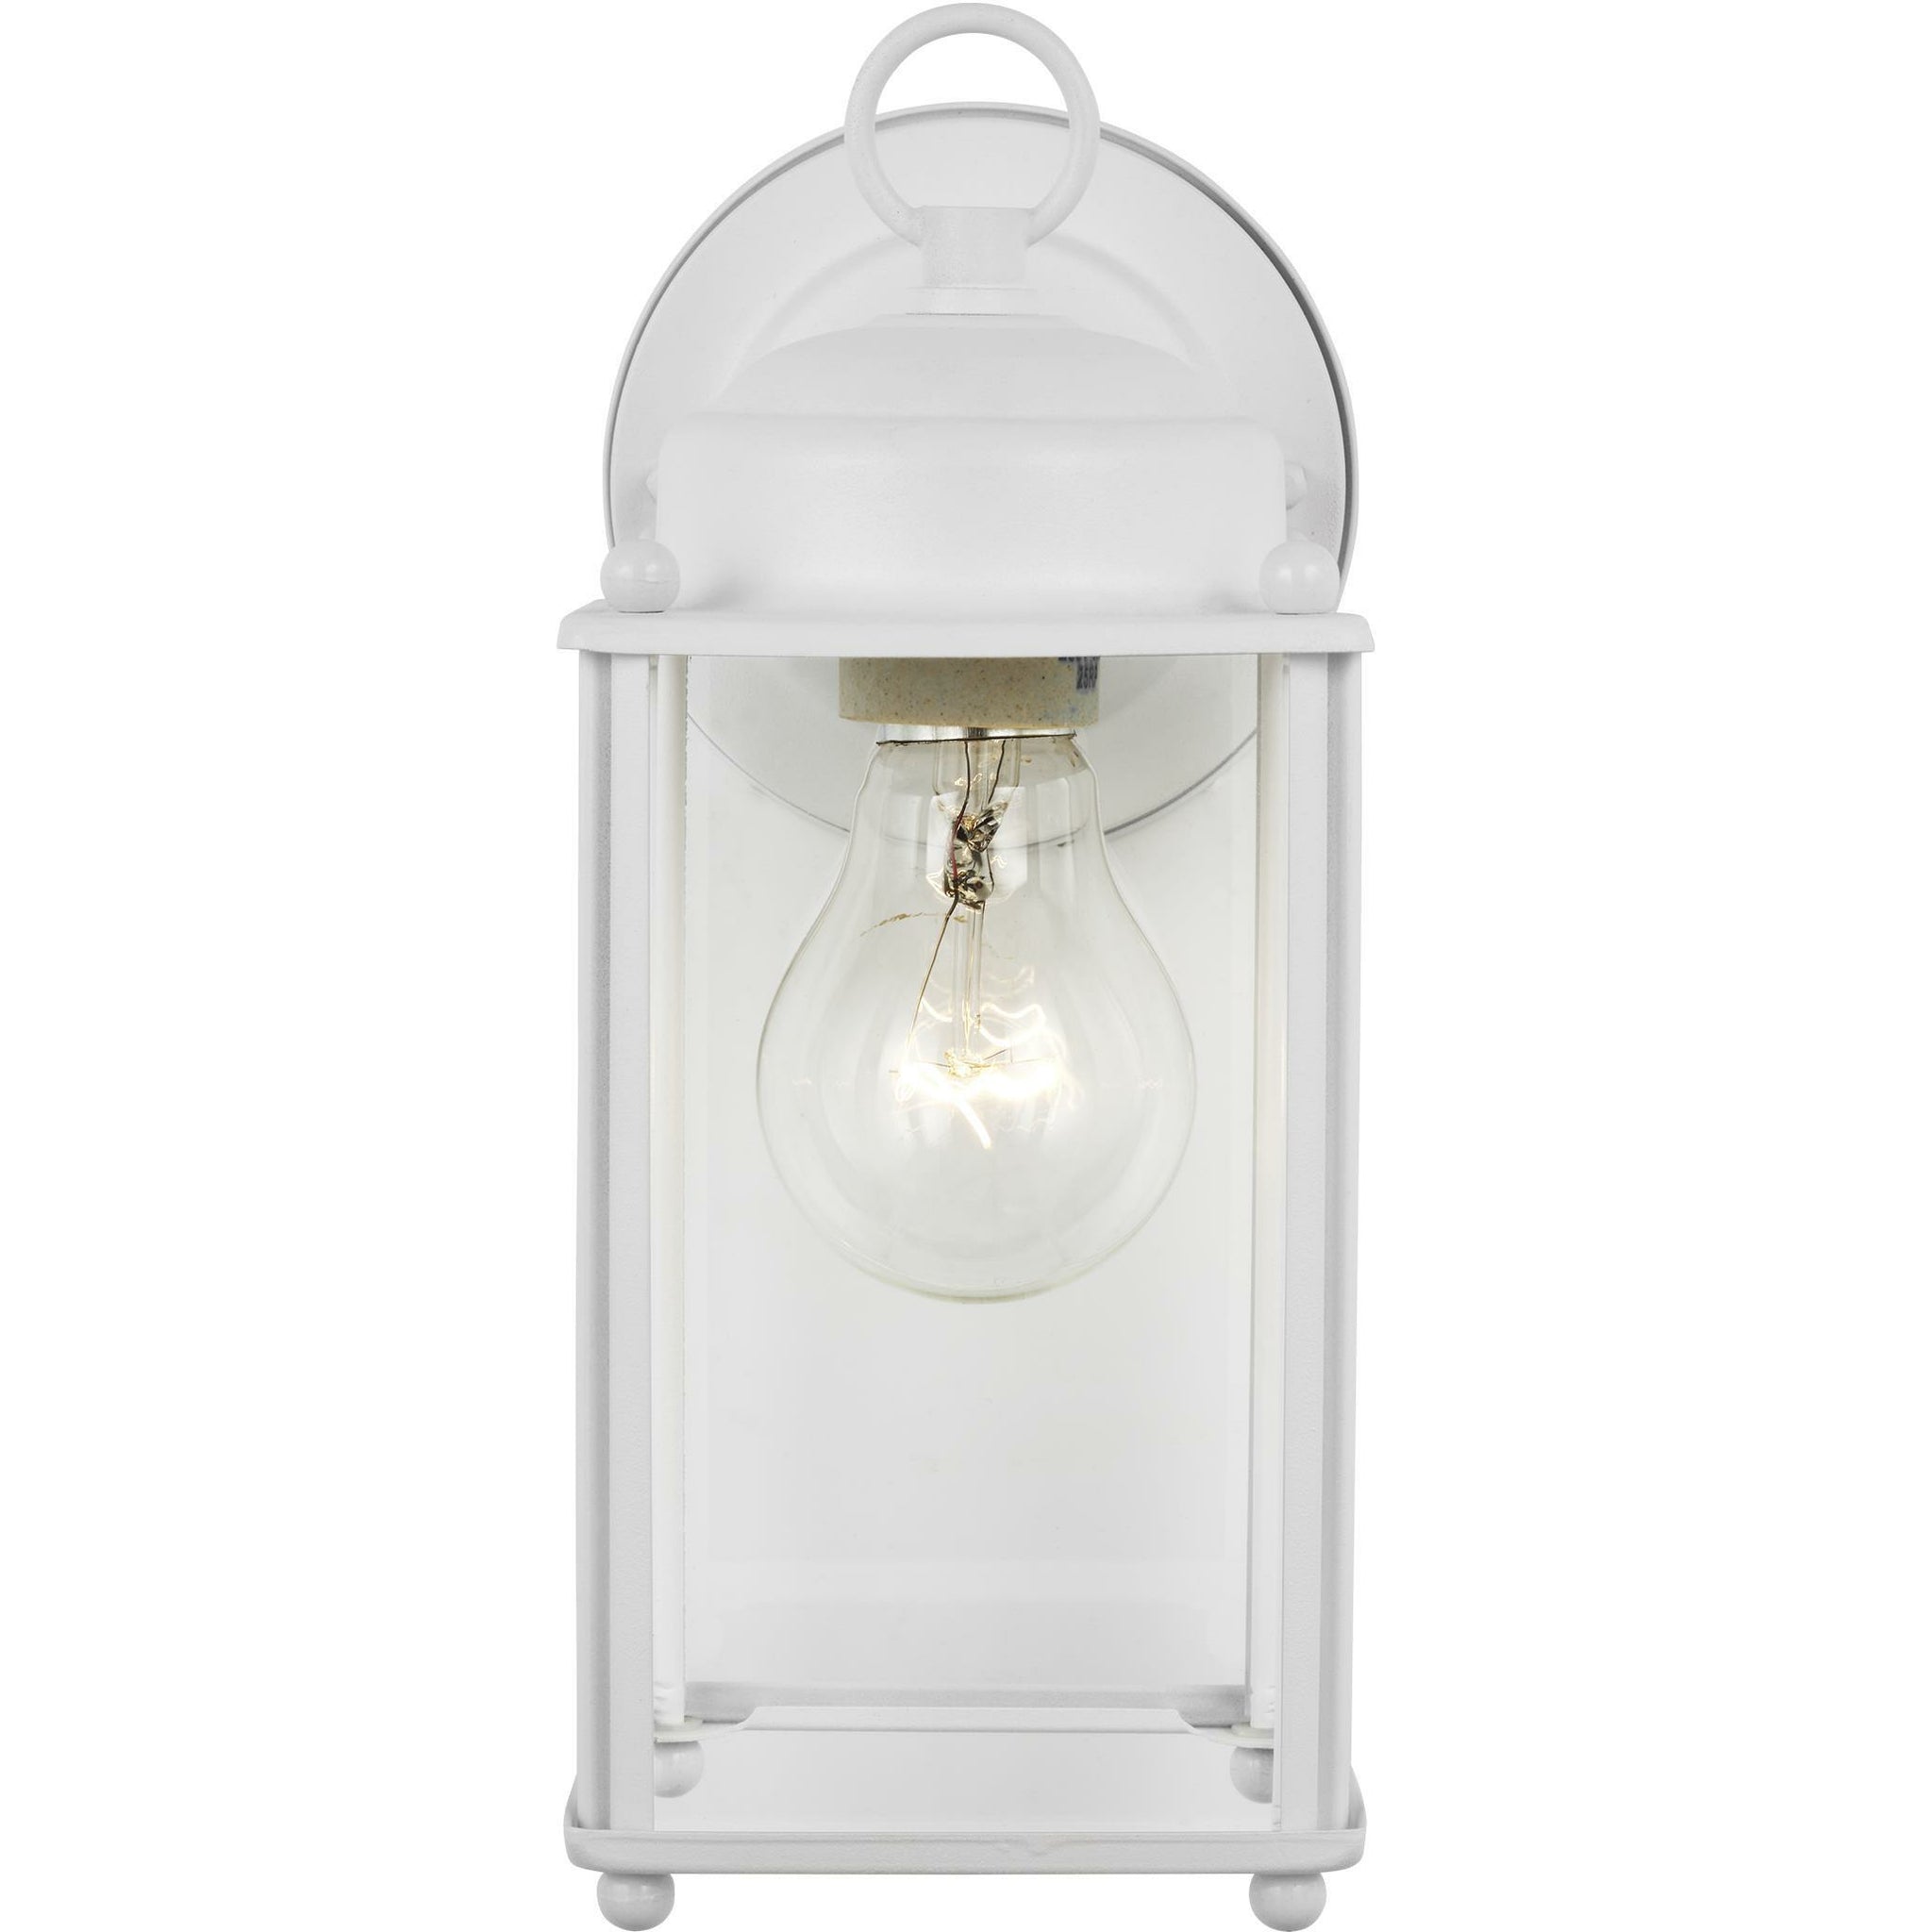 New Castle Outdoor Wall Light White